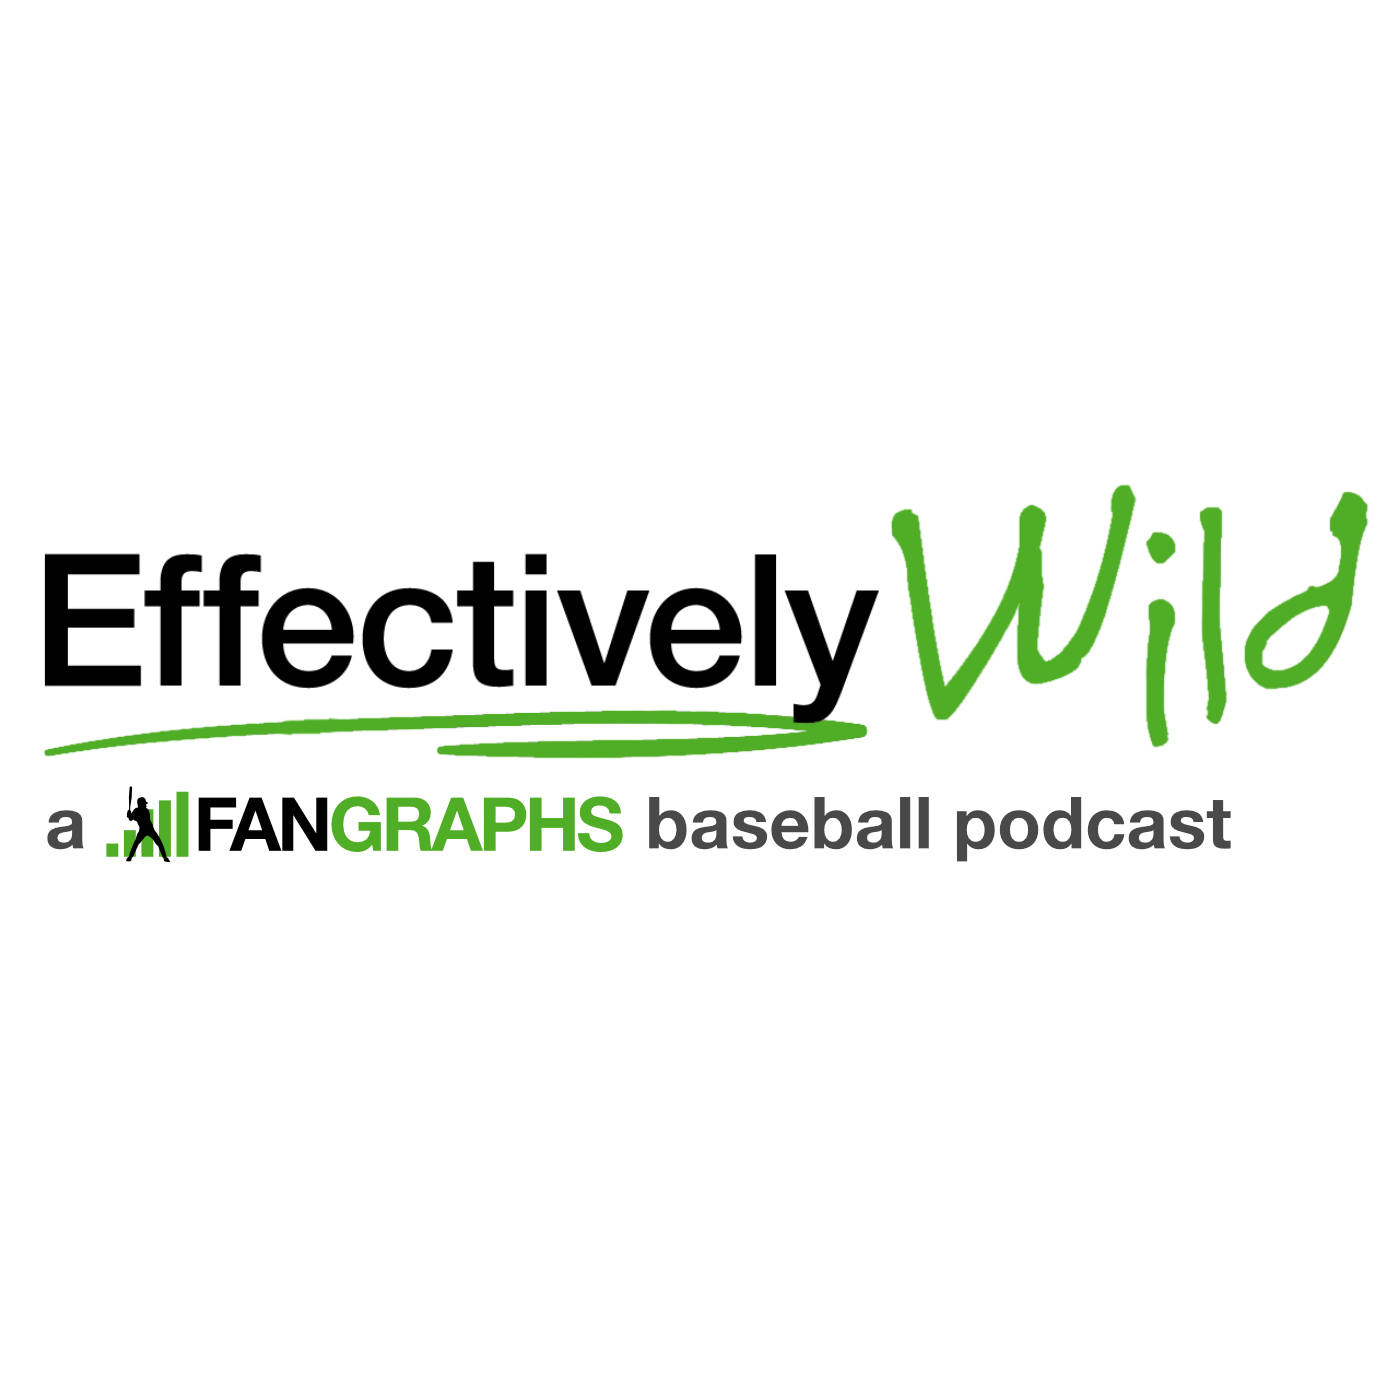 A highlight from Effectively Wild Episode 1992: Hot or Hurt